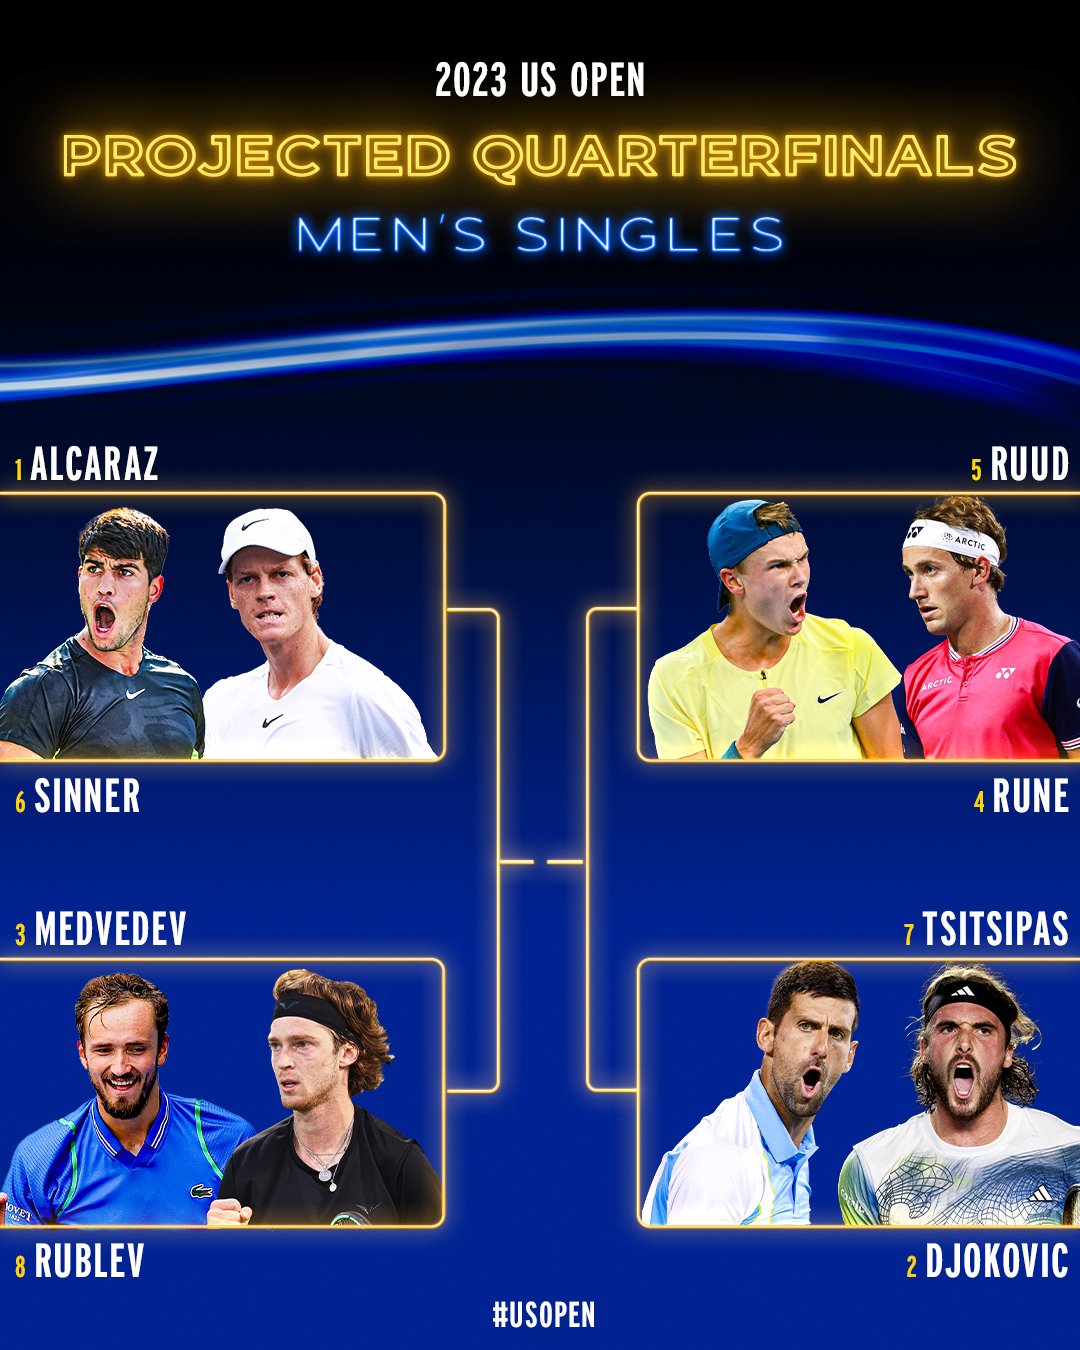 Projected quarterfinals for the US Open